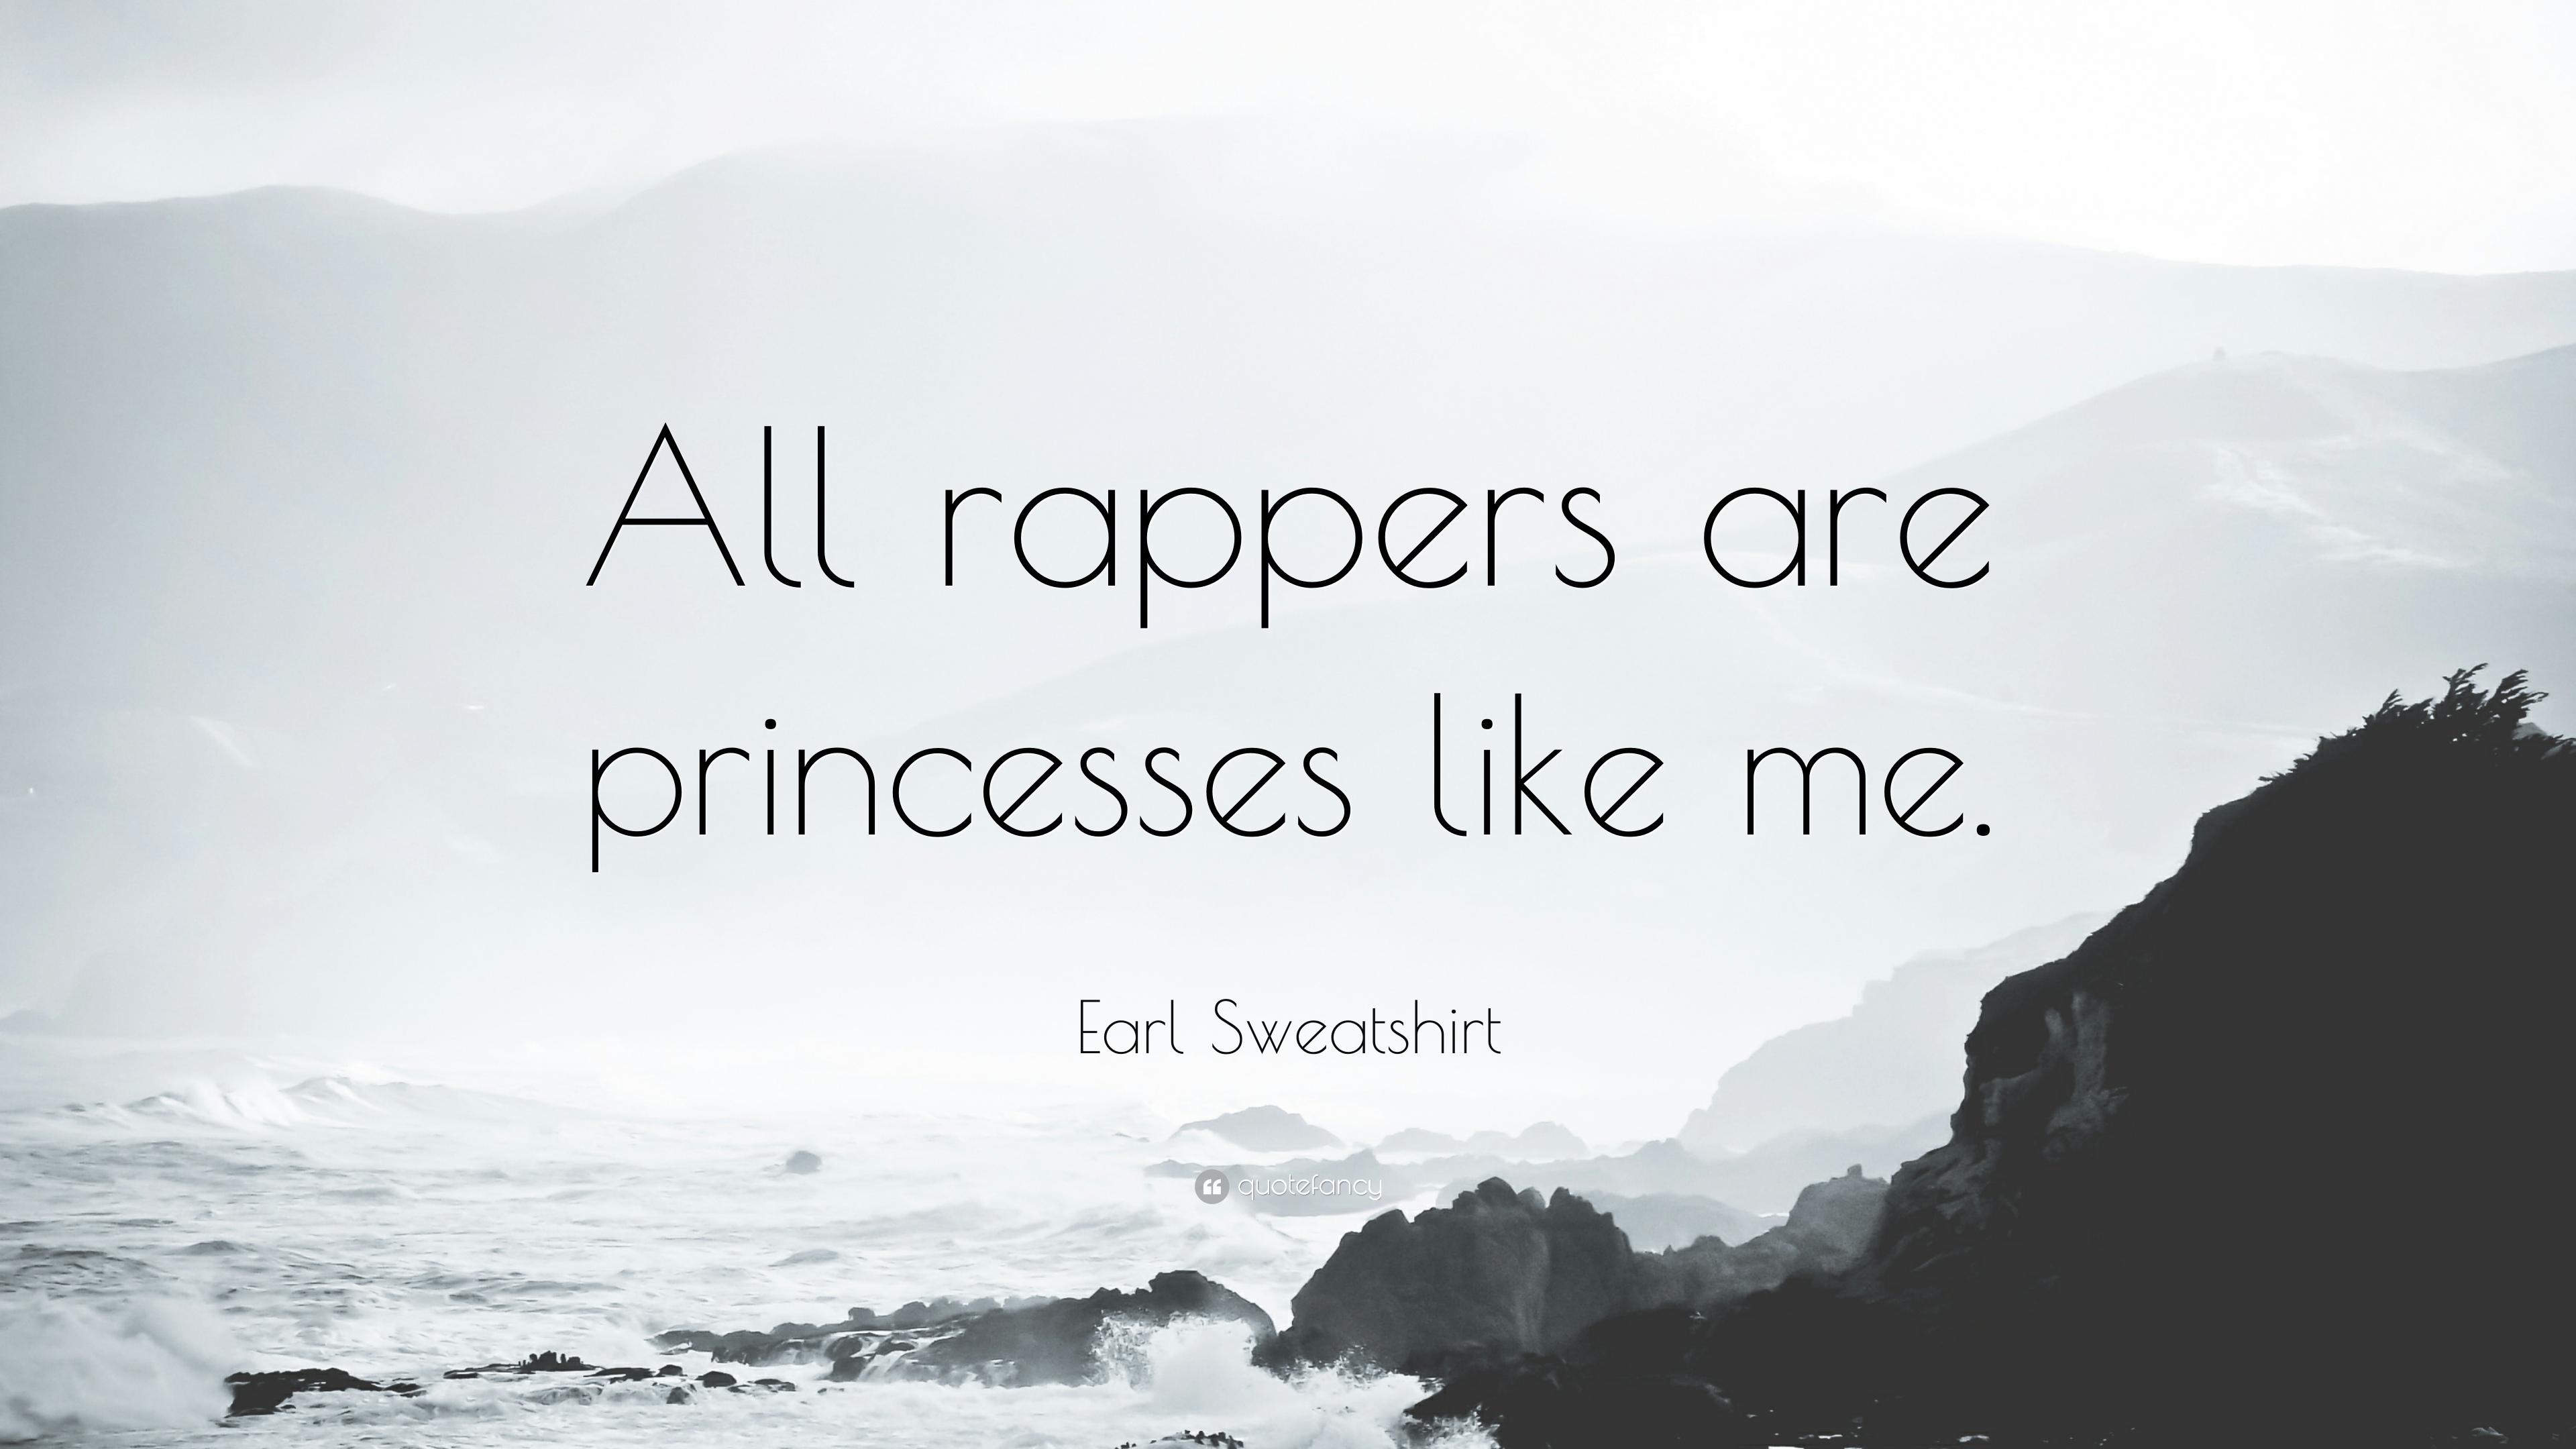 Earl Sweatshirt Quote: “All rappers are princesses like me.” 7